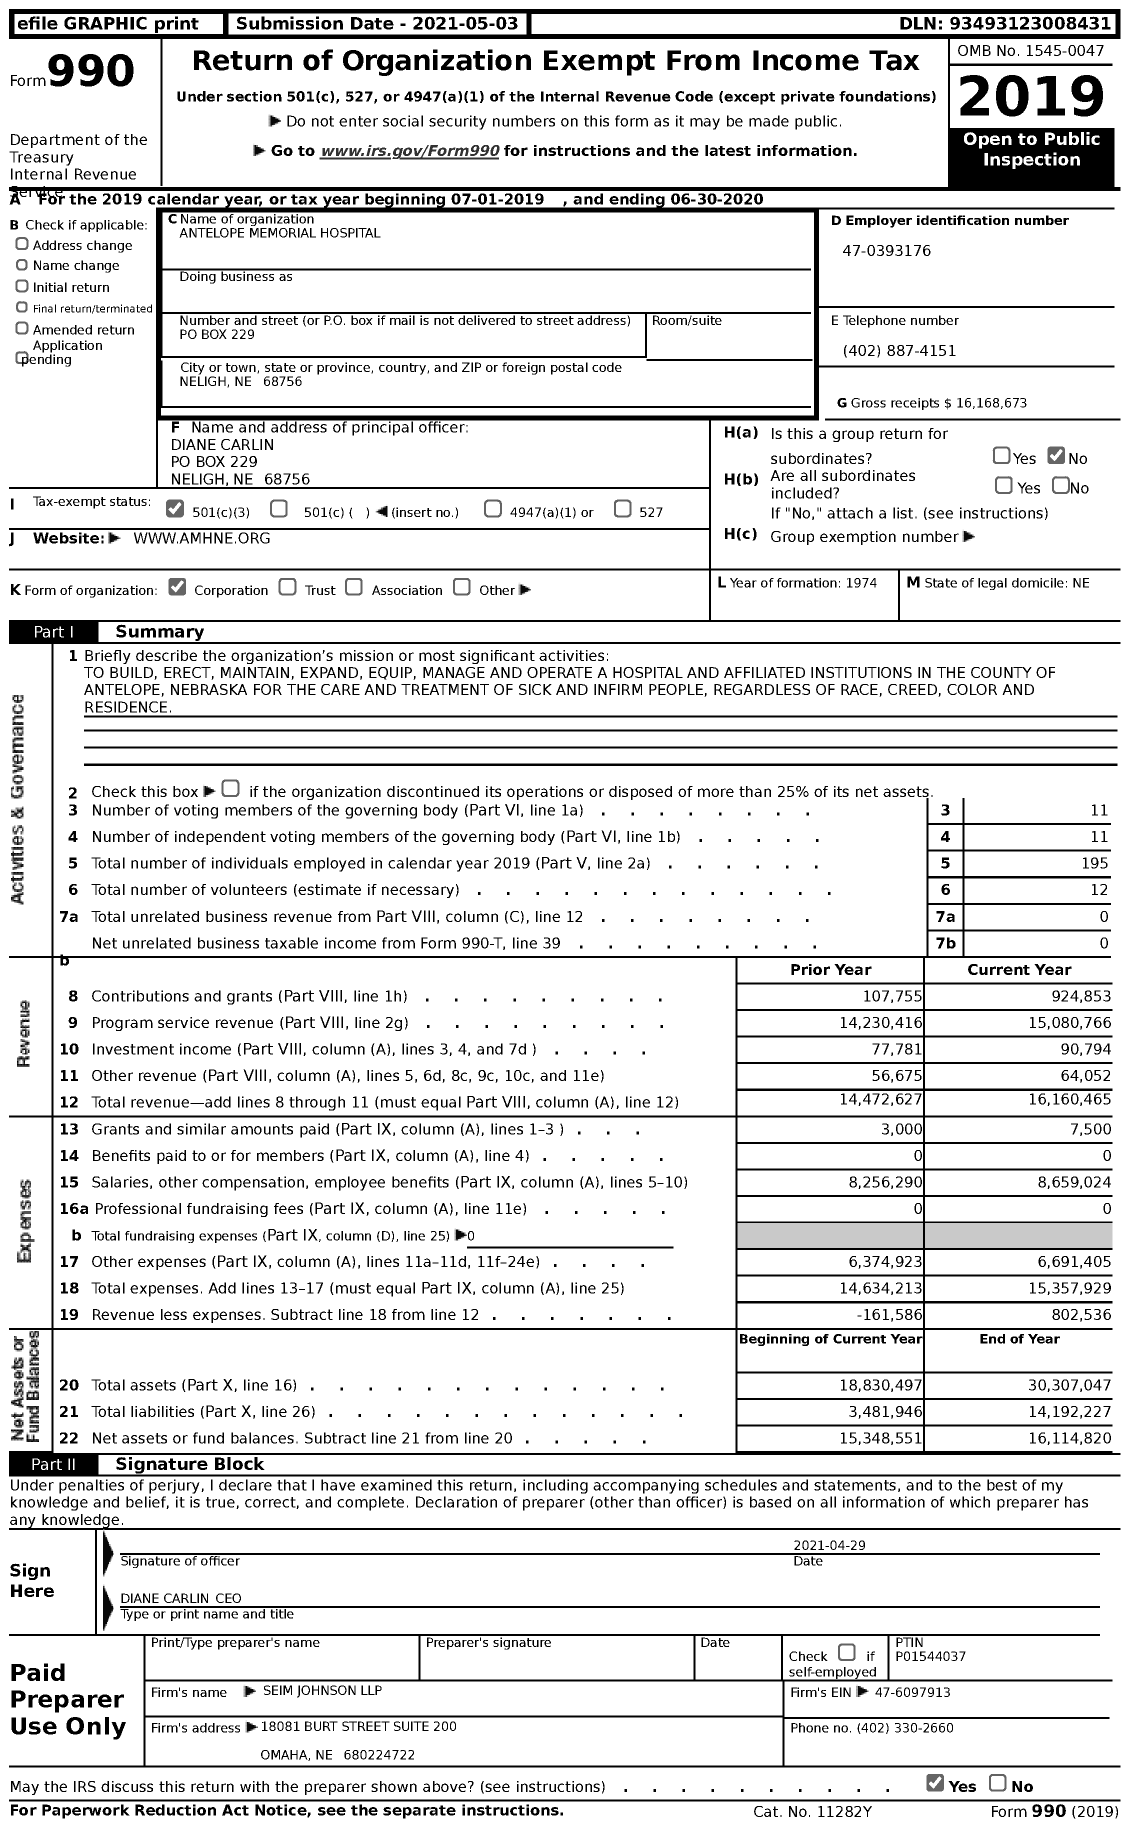 Image of first page of 2019 Form 990 for Antelope Memorial Hospital (AMH)